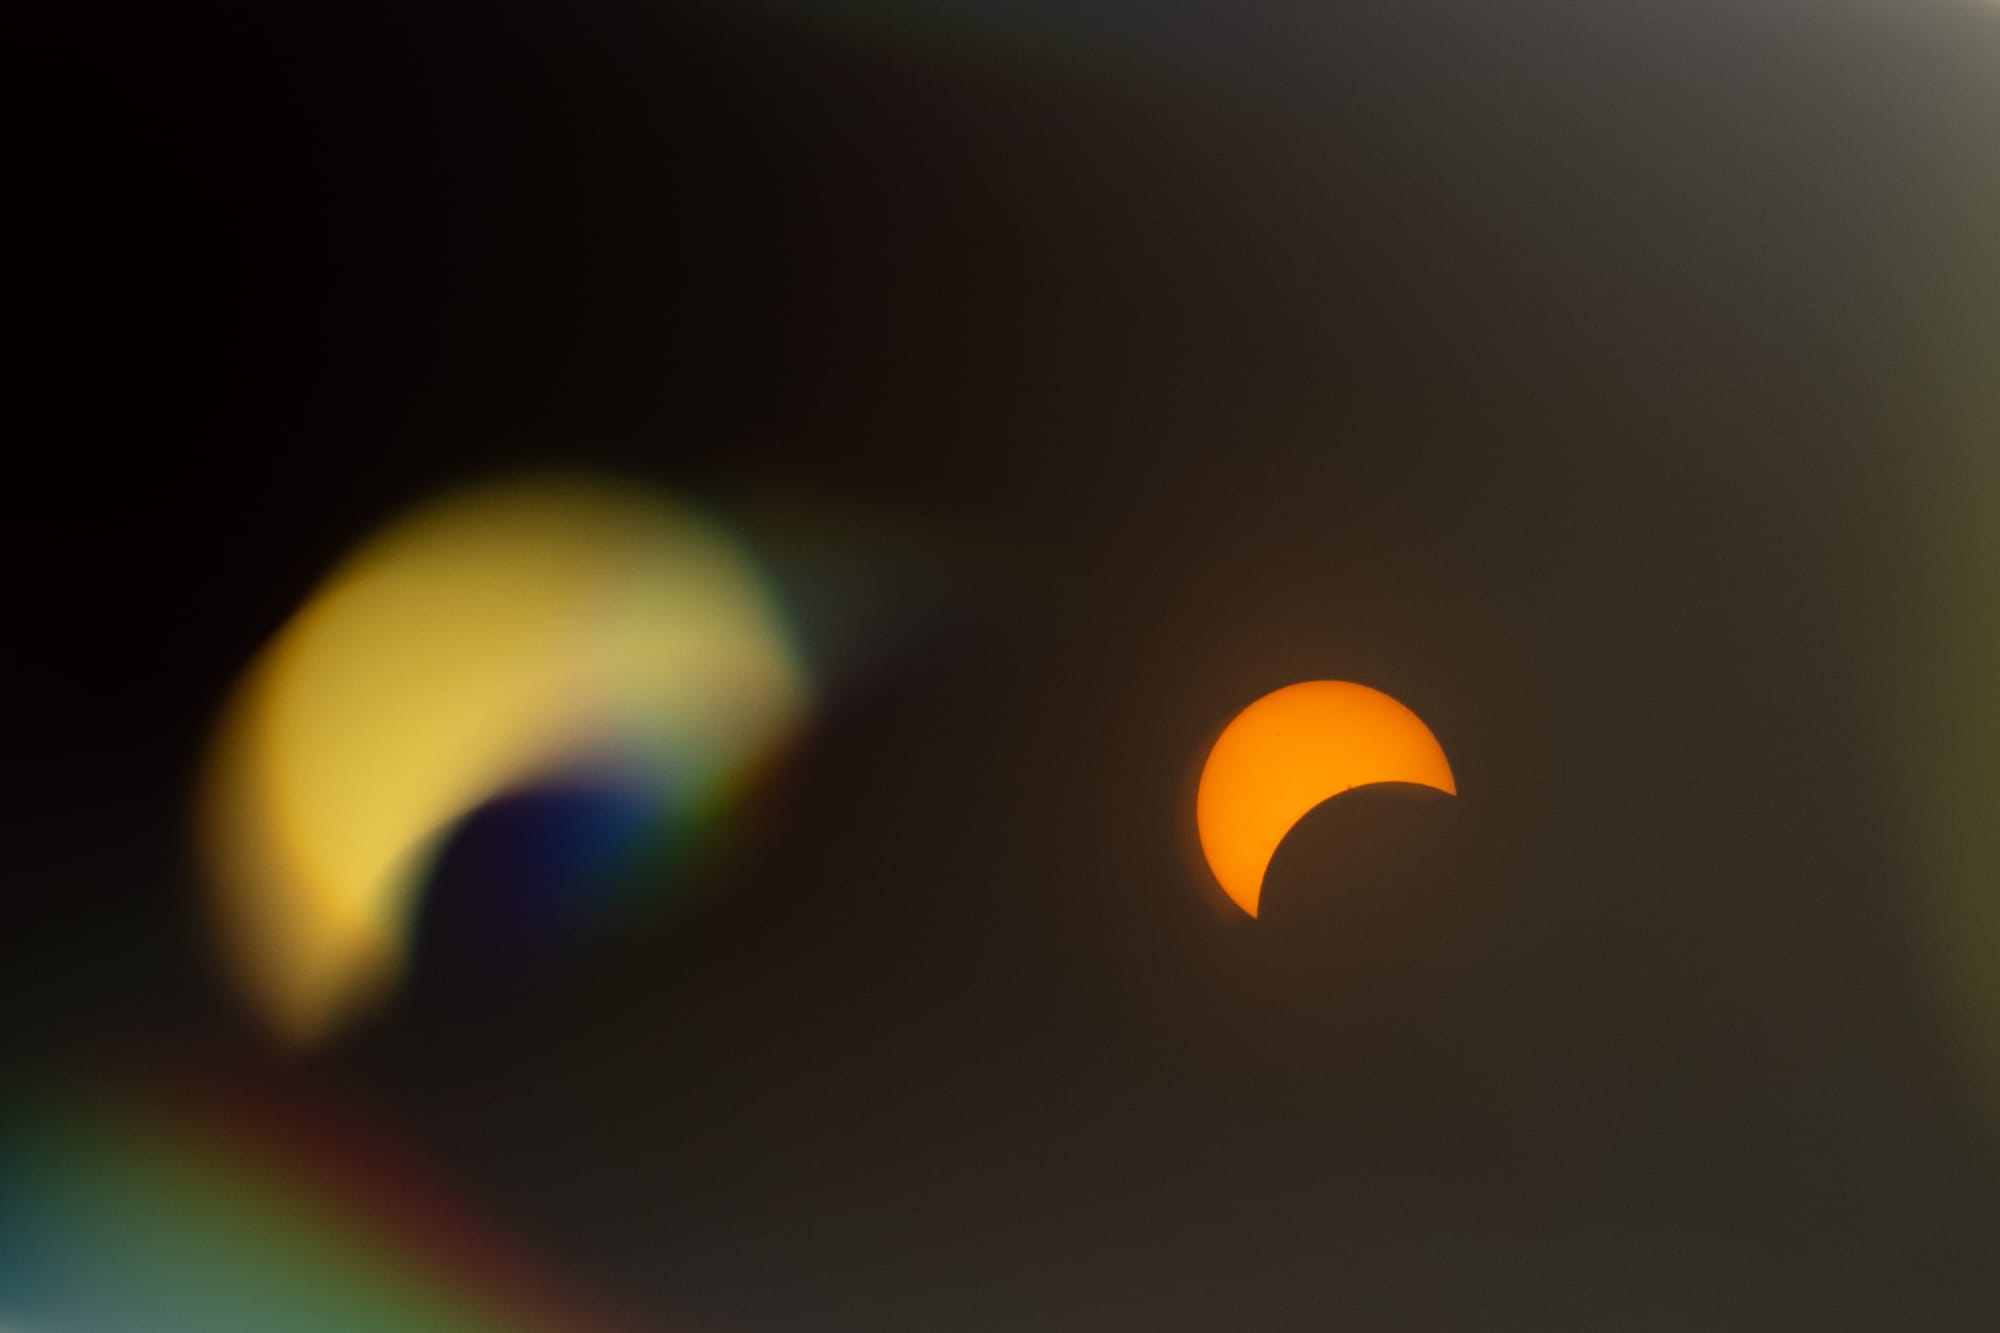 These Photos Show How Roanoke Caught a Glimpse of the Solar Eclipse